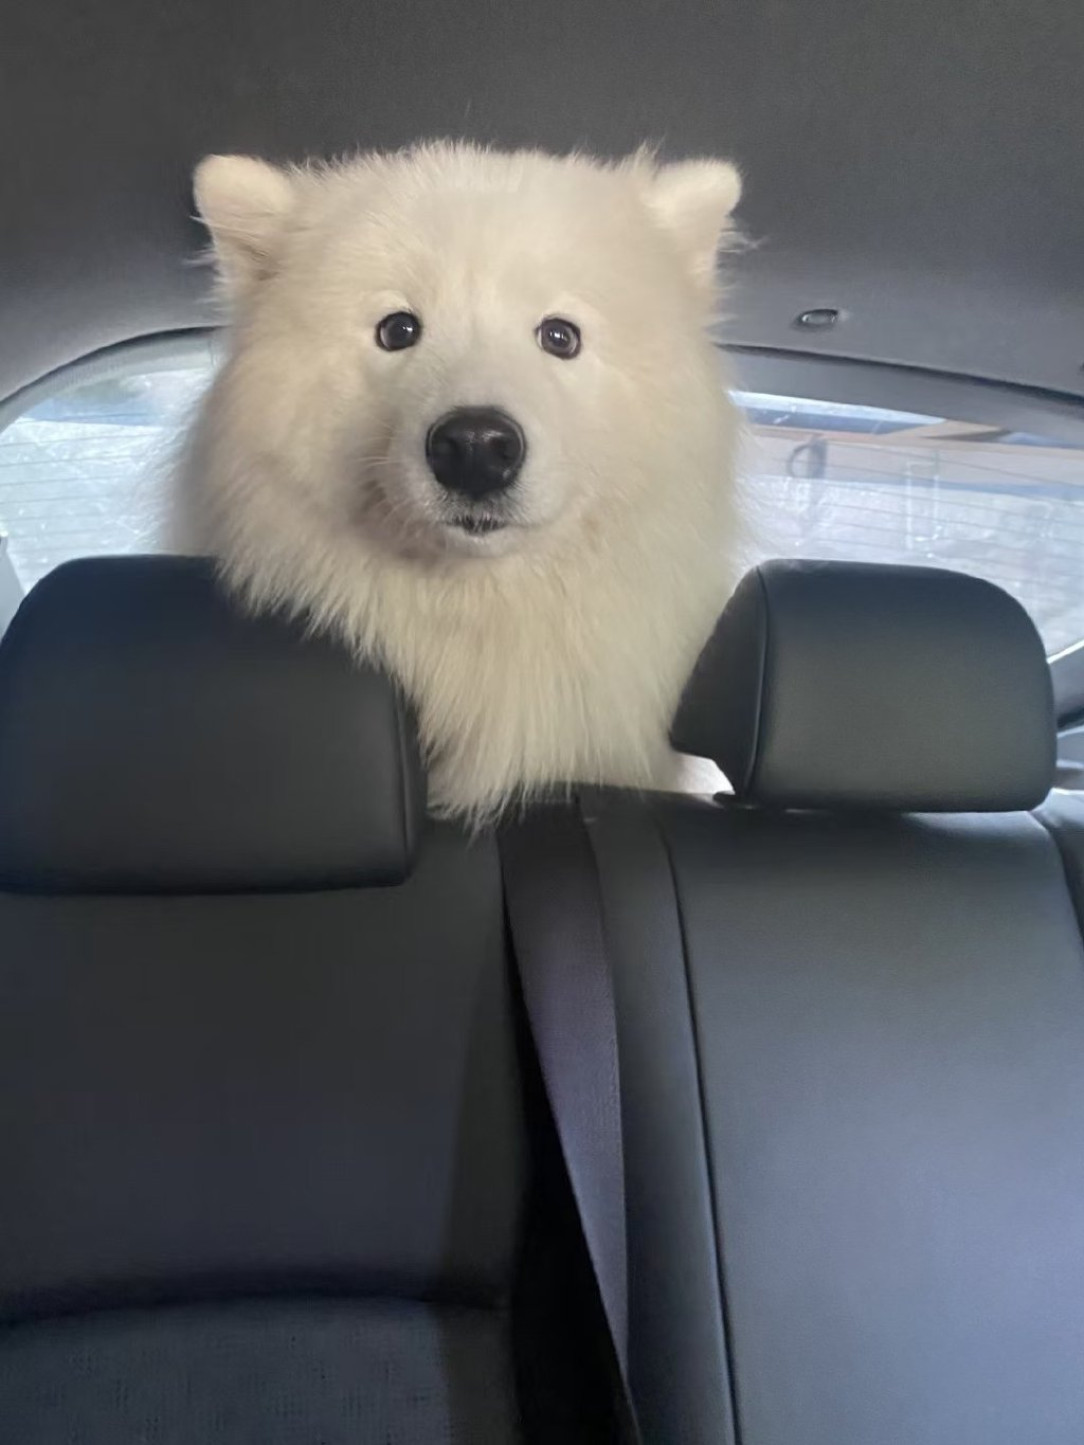 where are we going?